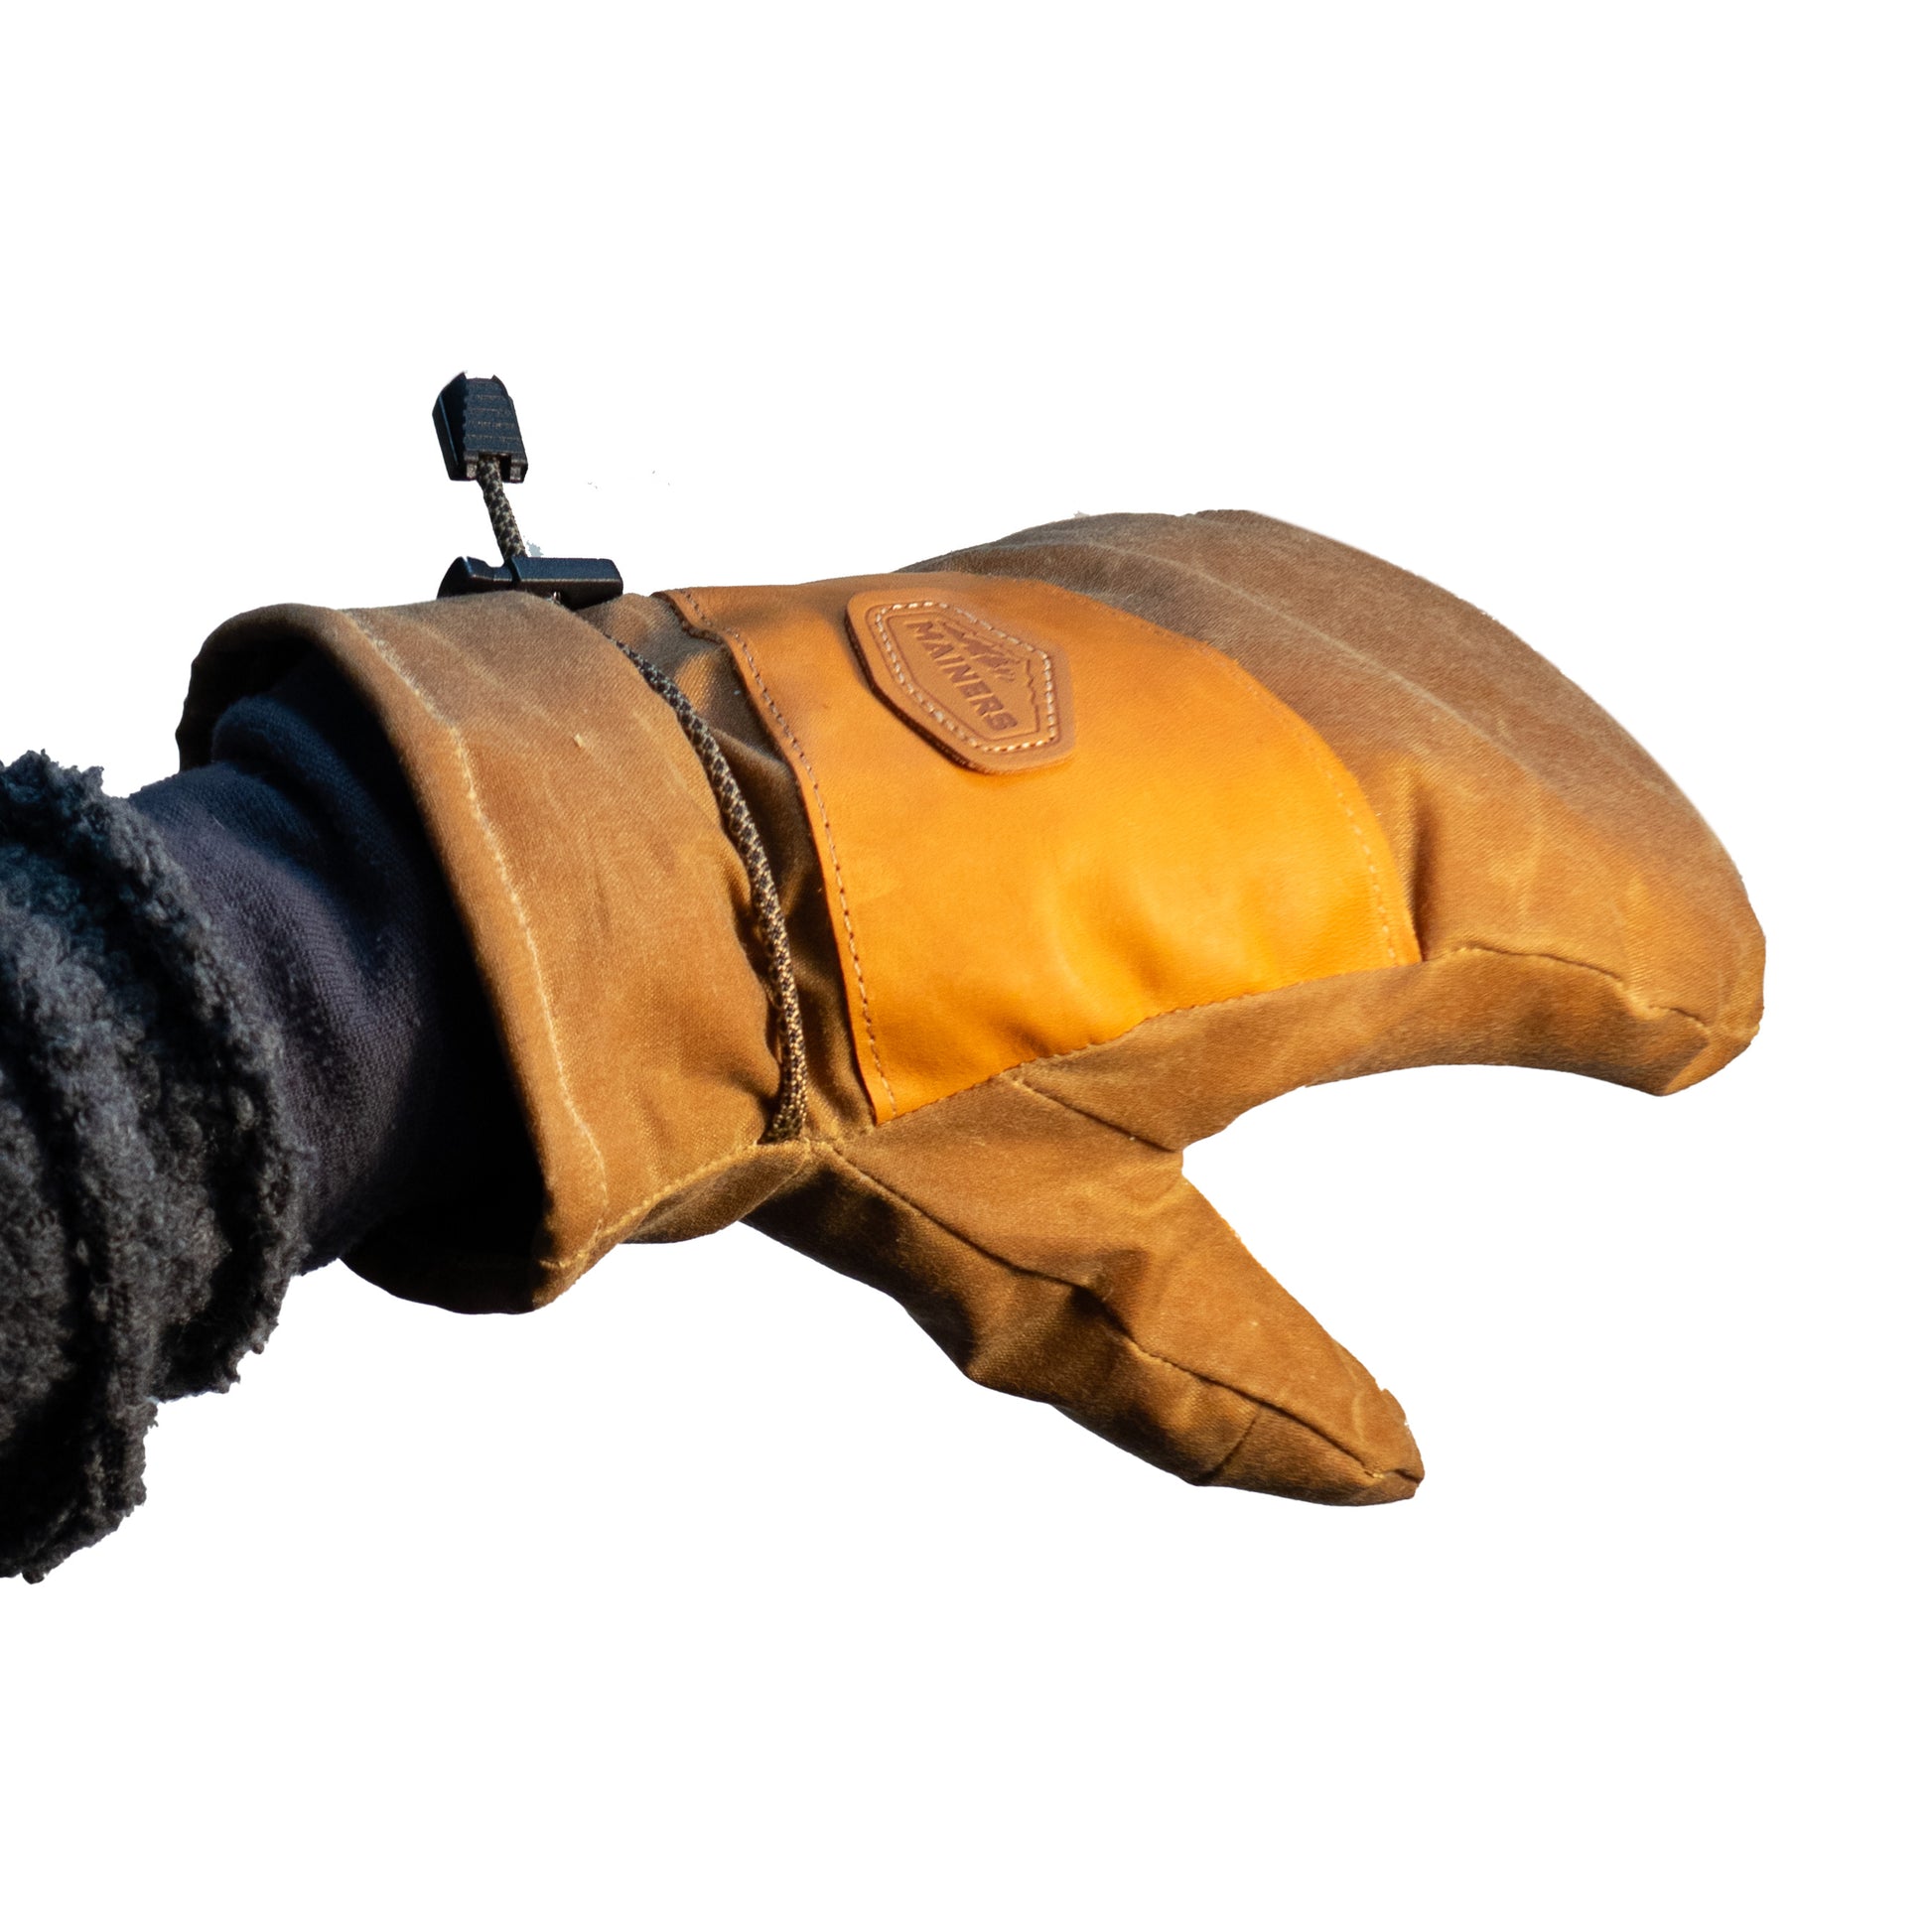 A person's hand holding a pair of Mainers Peaks Mitts.